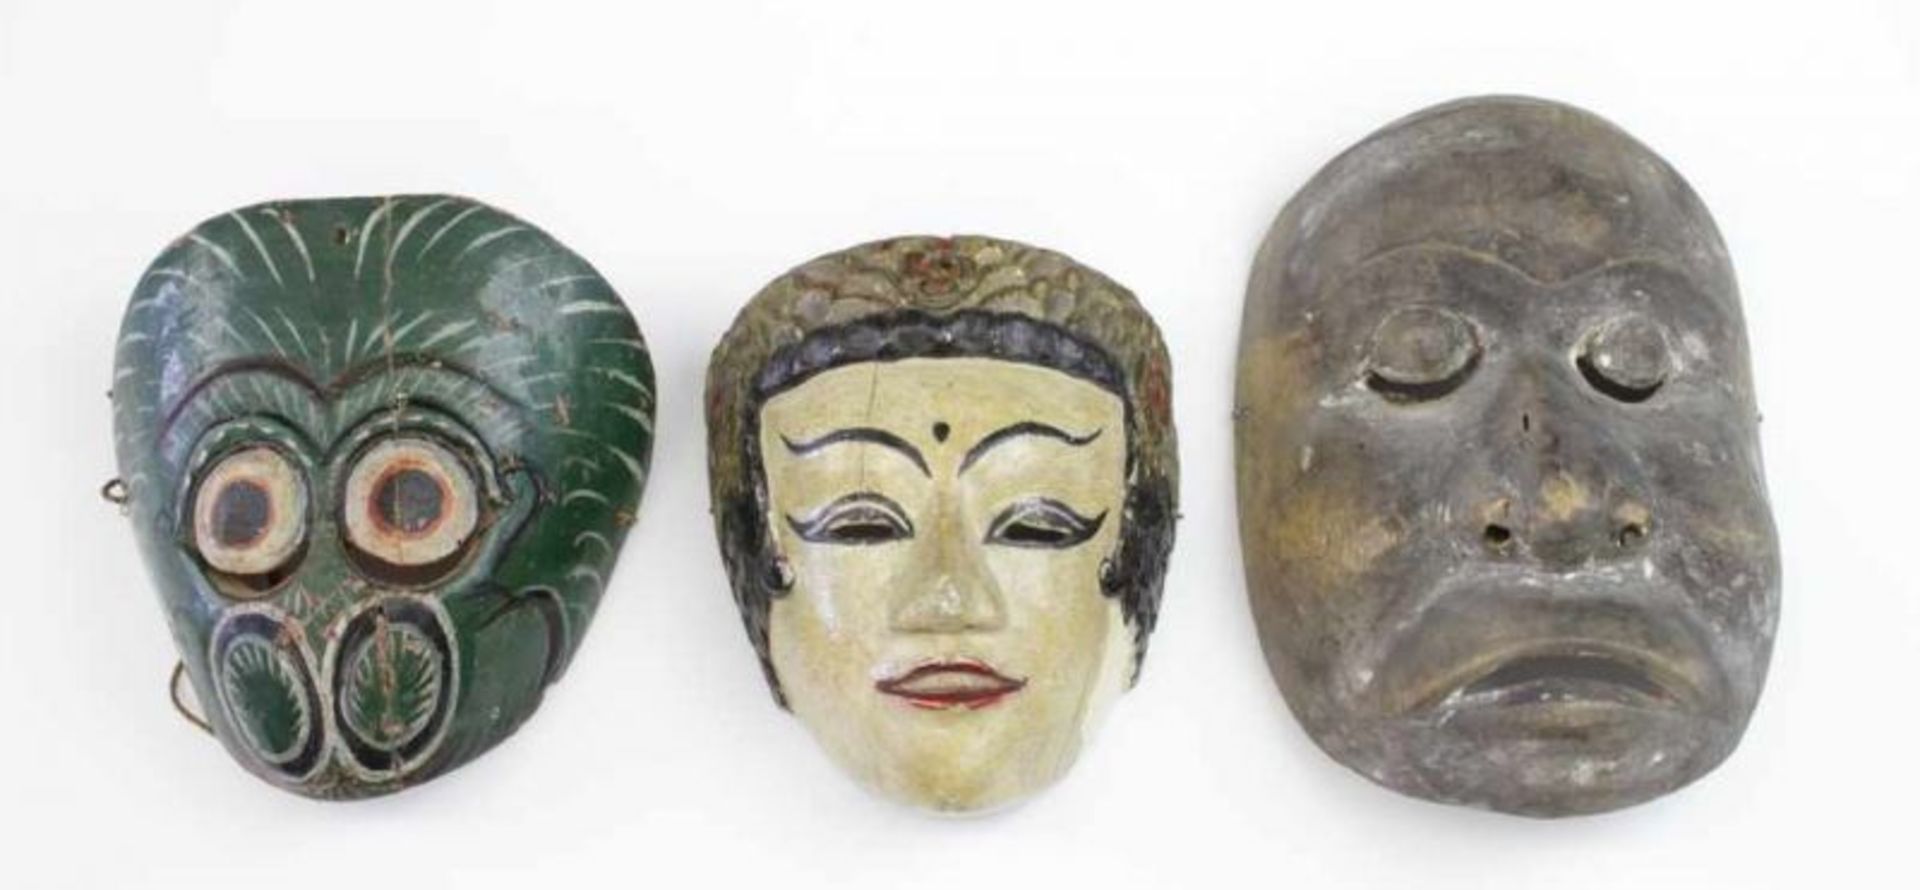 Java, collection of wooden painted Topeng masks, various charactersh. 13 - 18,5 cm.; [8]300,00 - Bild 3 aus 3